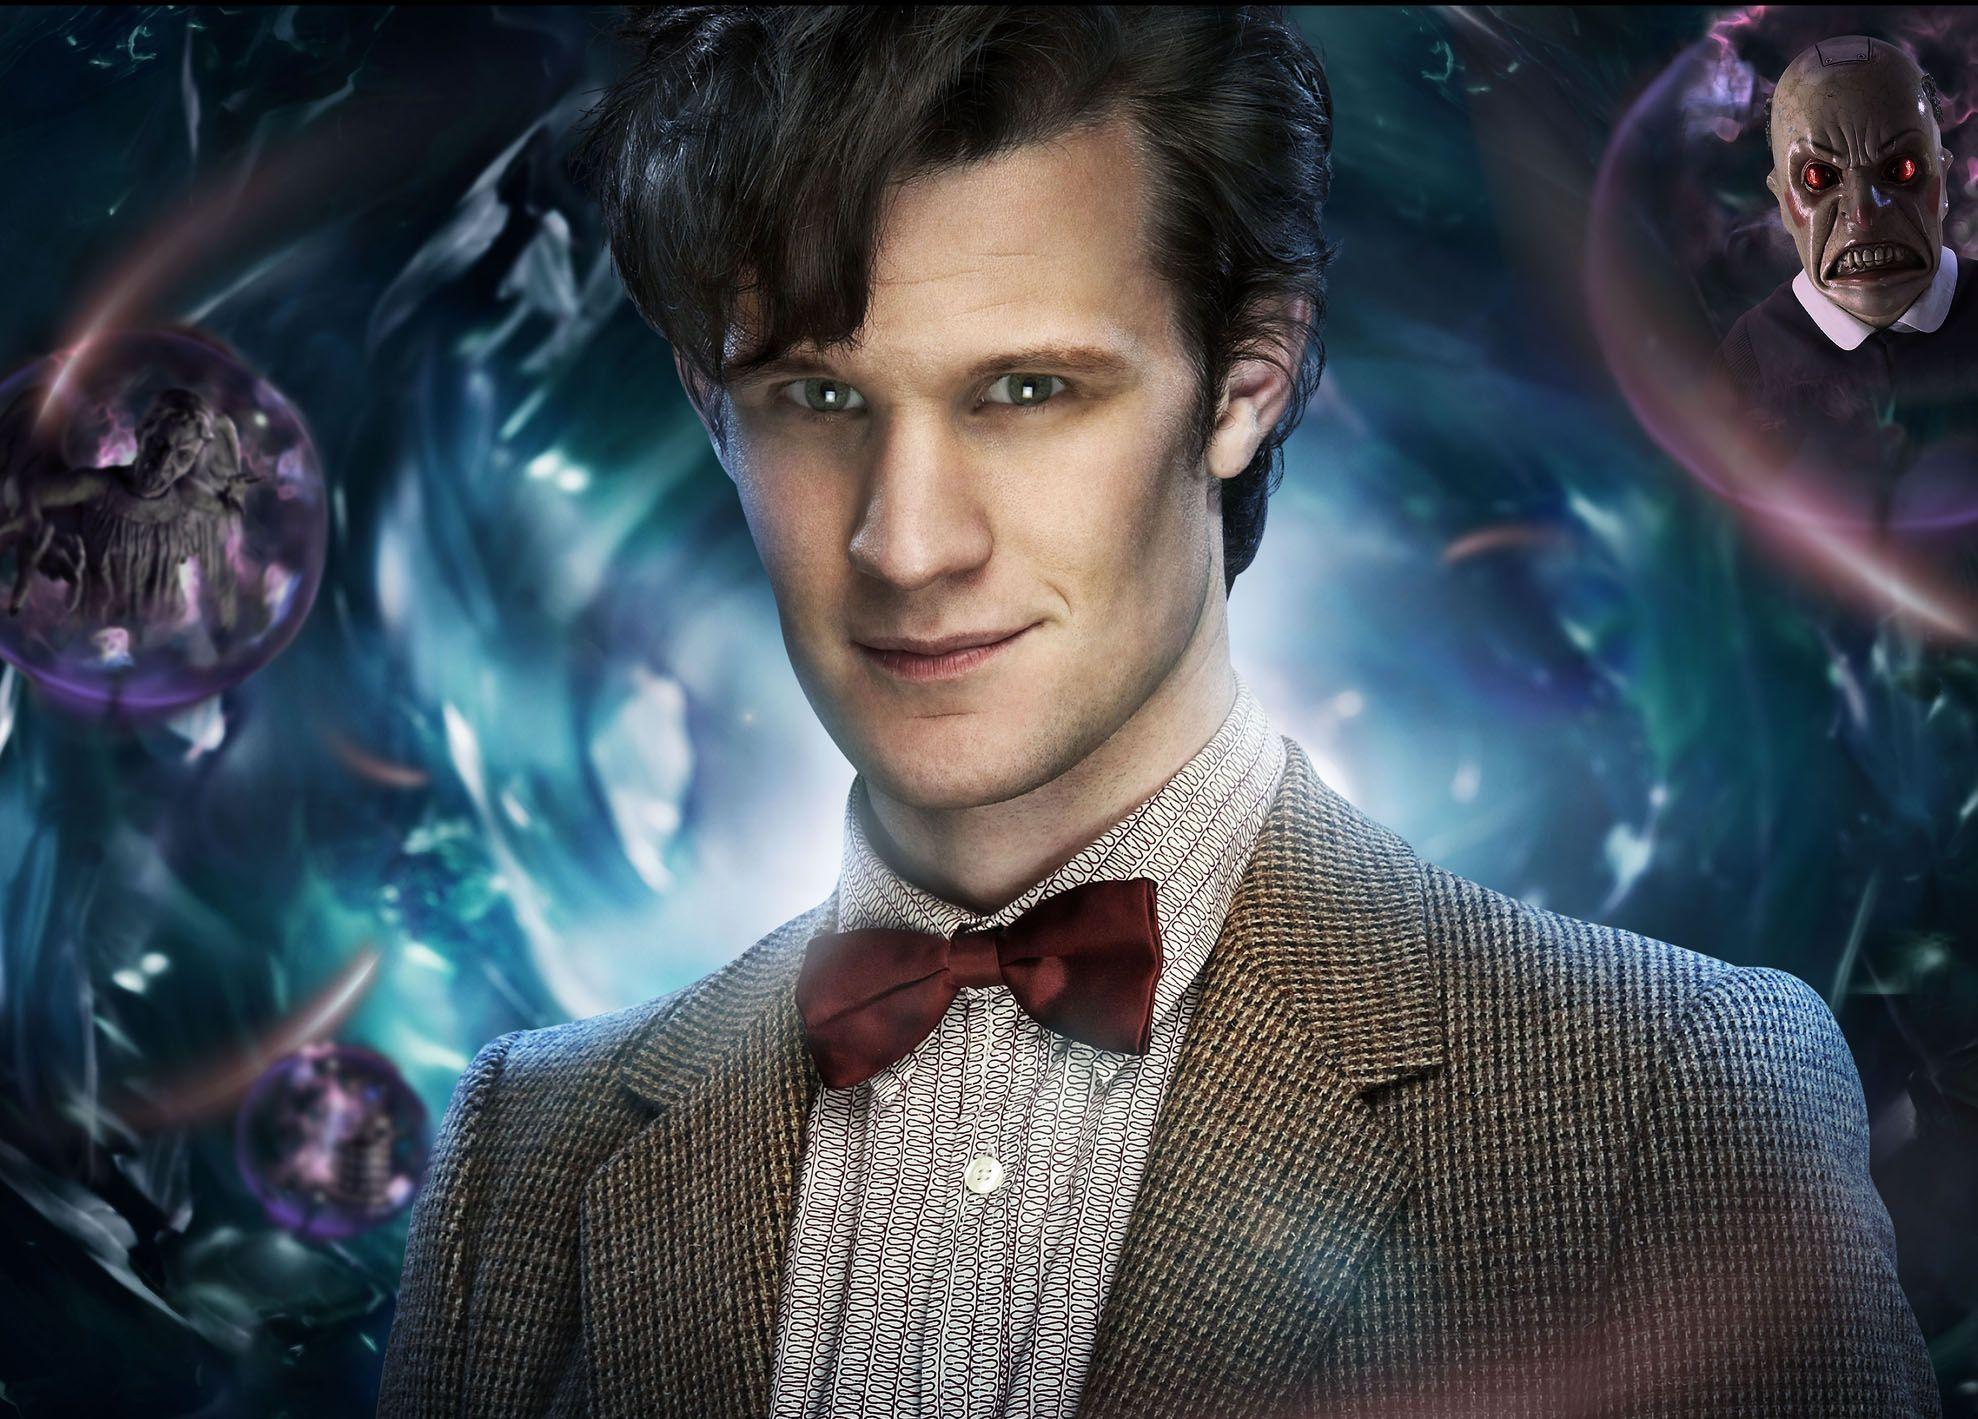 image For > 11th Doctor Wallpaper